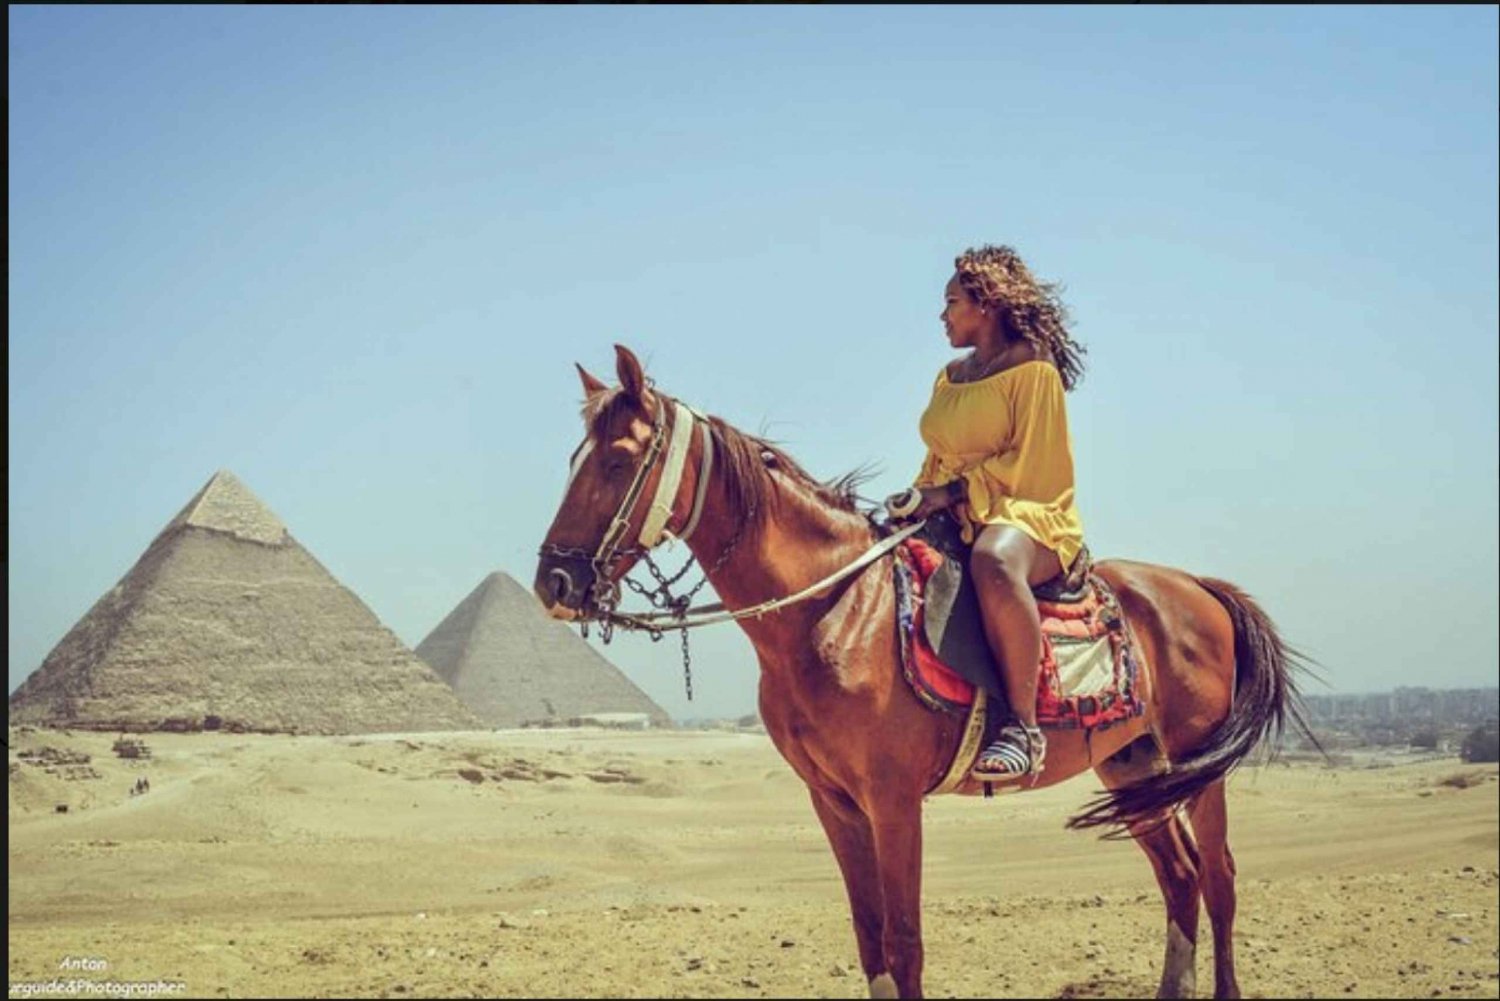 Private Arabian Horses Ride at the Pyramids With Pickup